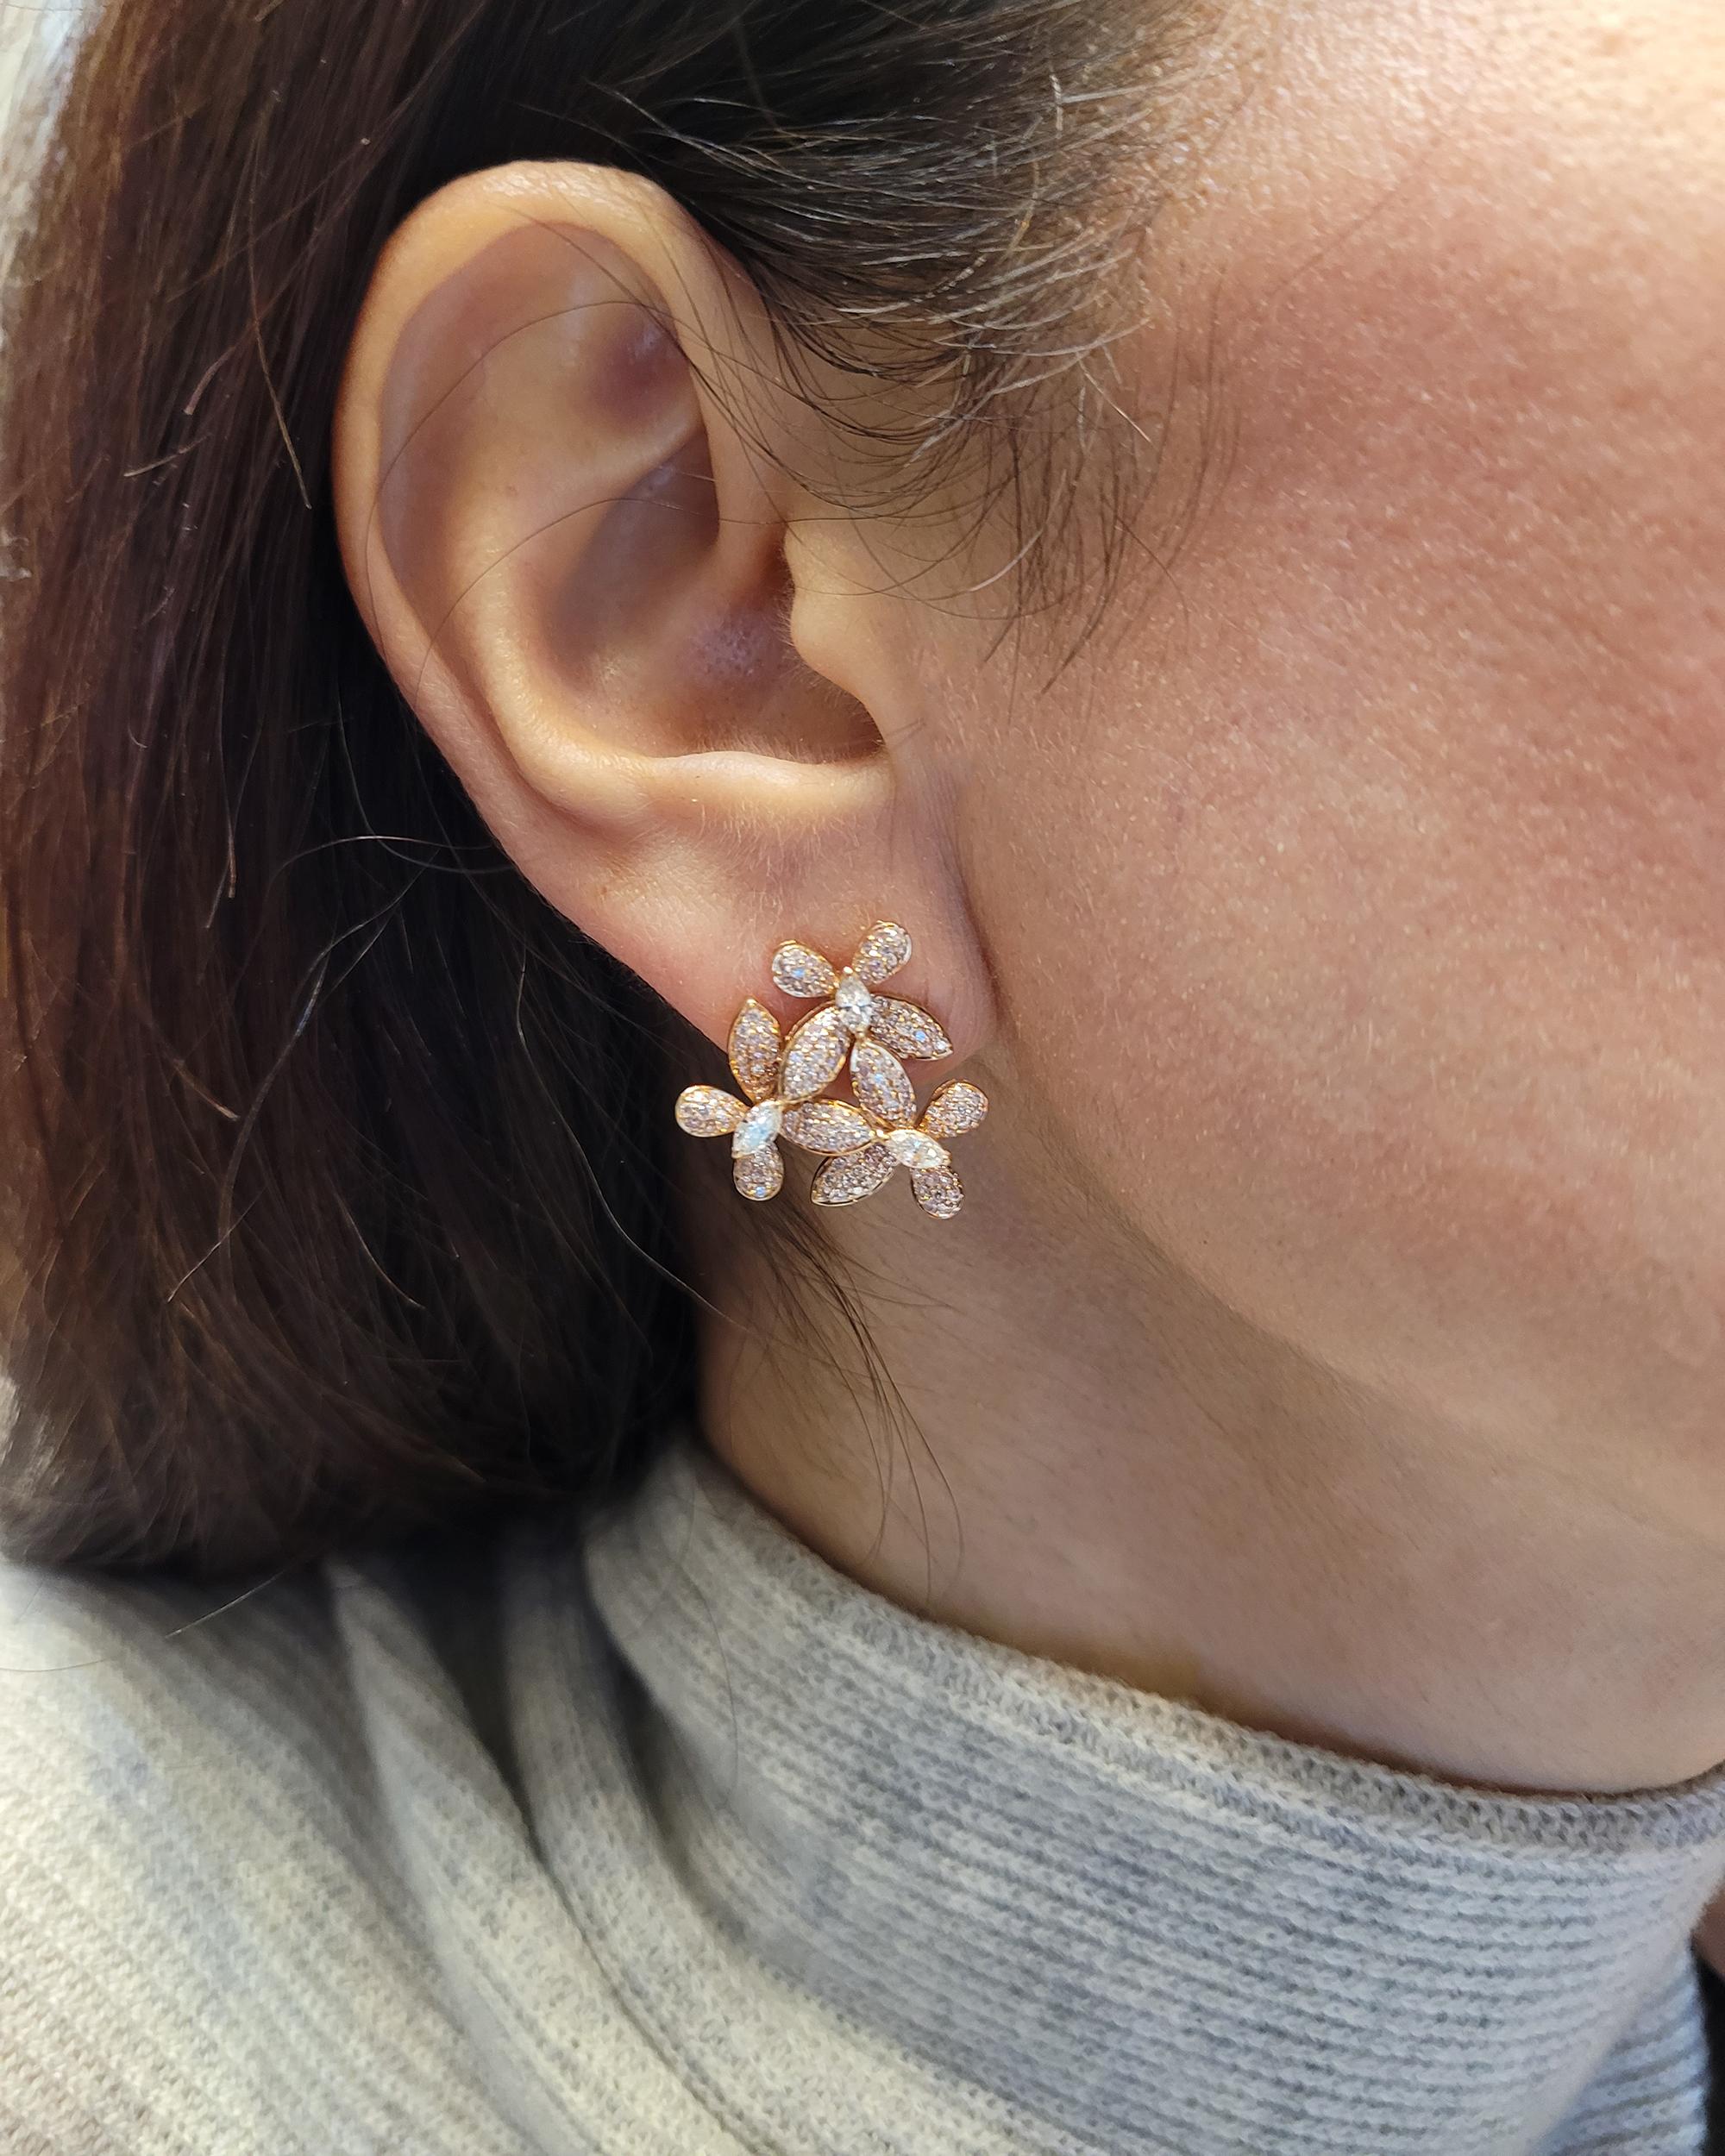 Triple flower earrings made with pink and white diamonds set in 18k rose gold.
300 round pink diamonds weighing 1.48 carats.
6 marquis white diamonds weighing 0.6 carats.
Total weight is 2.08 carats.
Gross weight is 11.25 g.